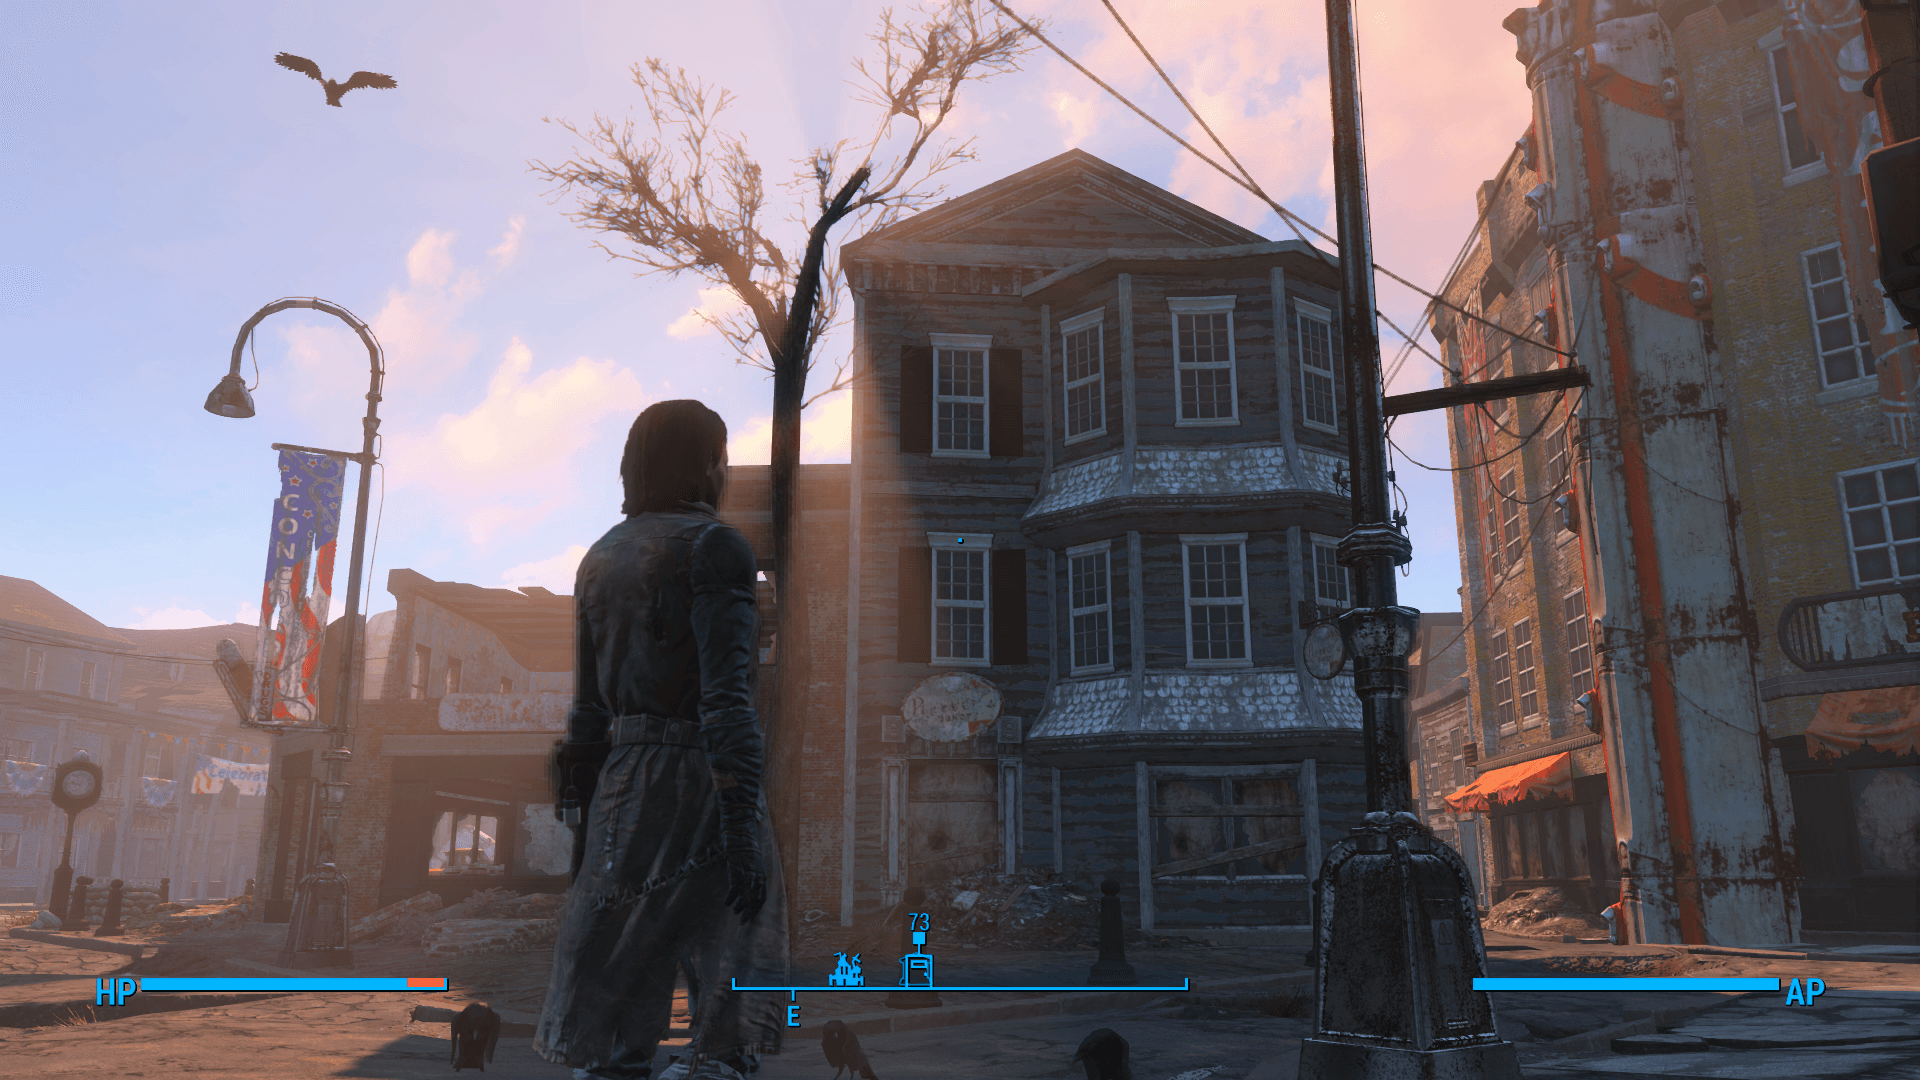 New Fallout 4 Leaked Uncompressed Screenshots Puts Low ... - 1920 x 1080 png 878kB